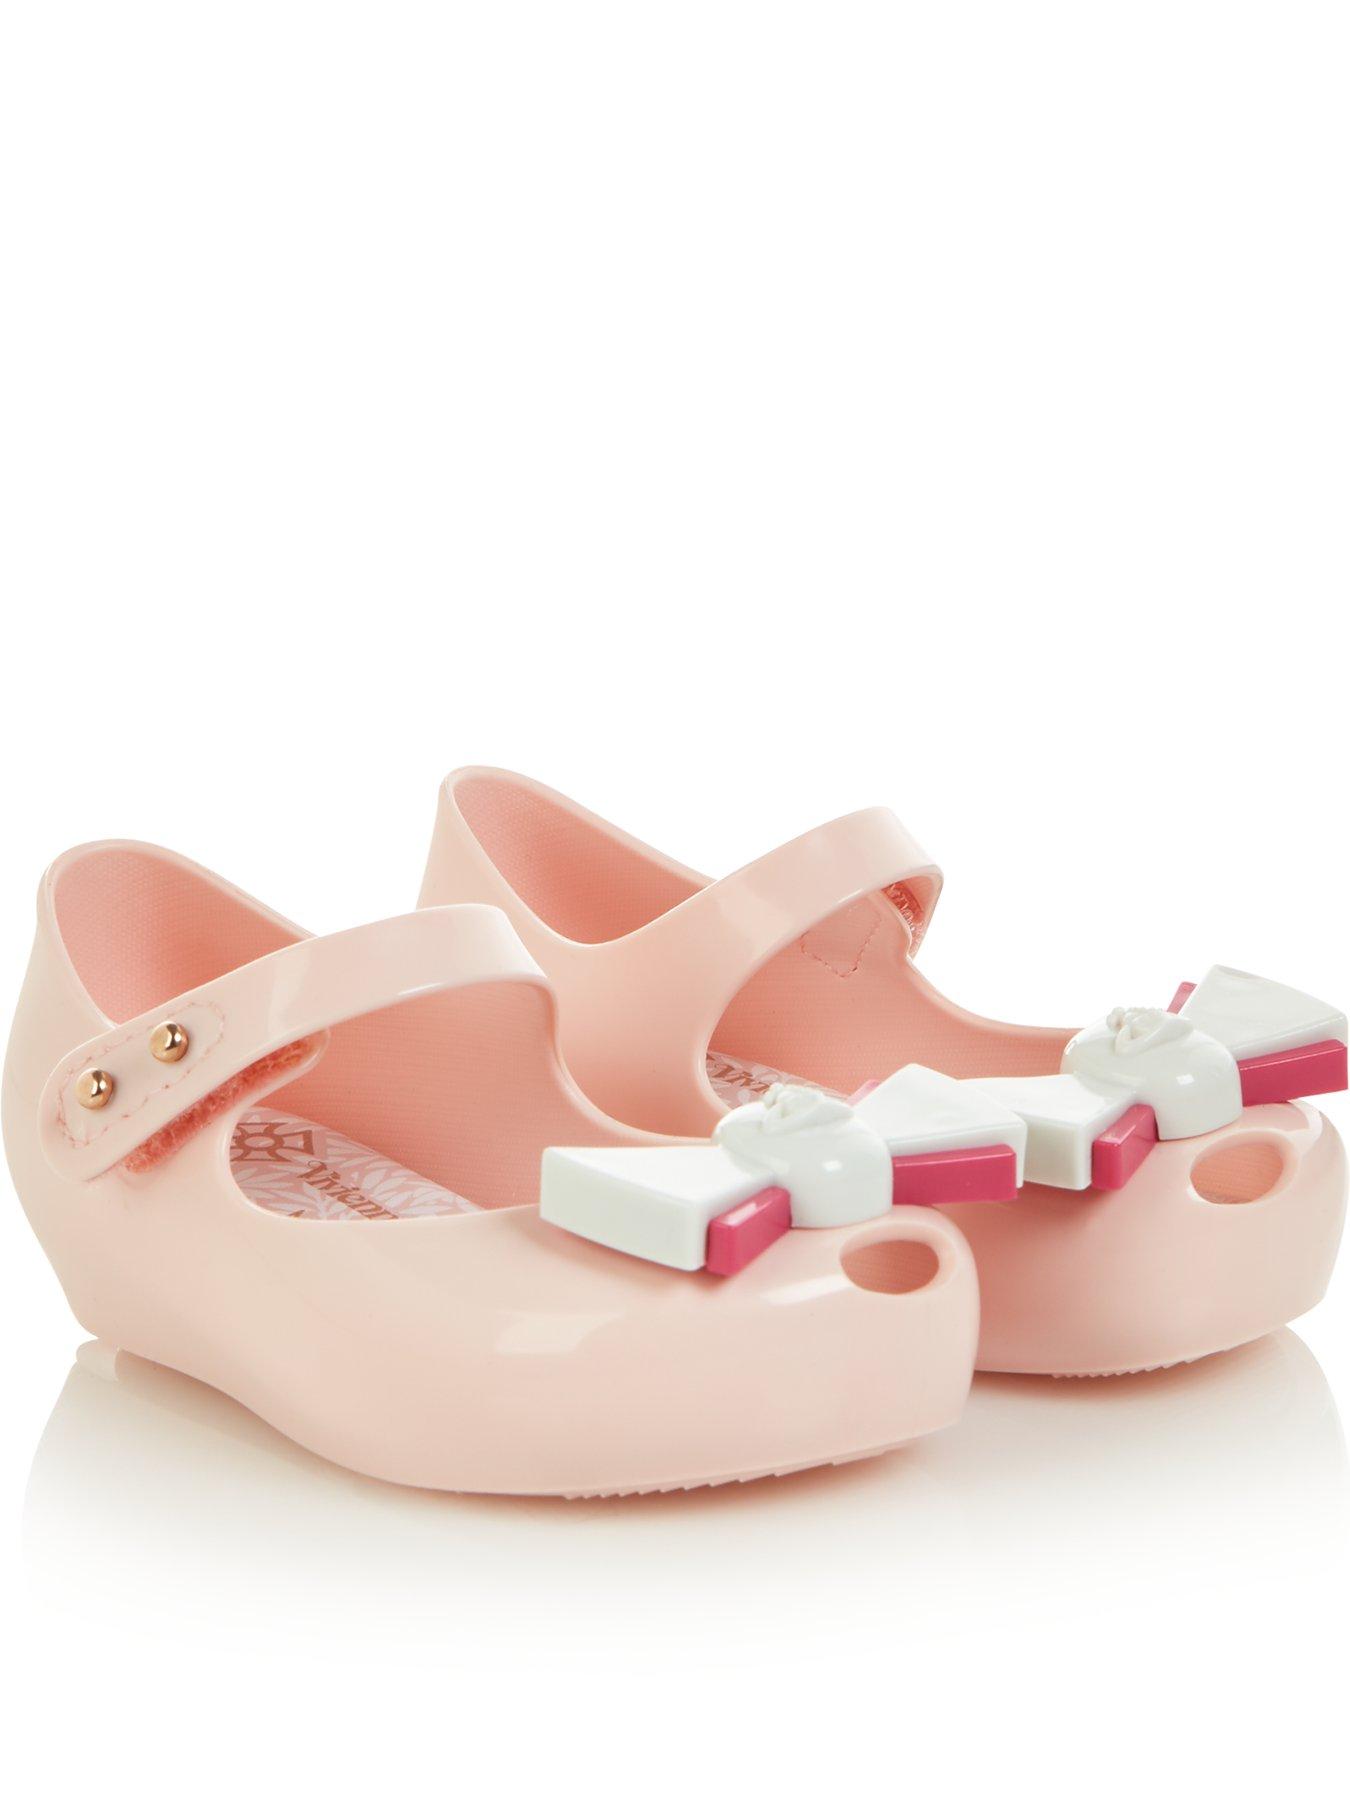 baby vivienne westwood shoes